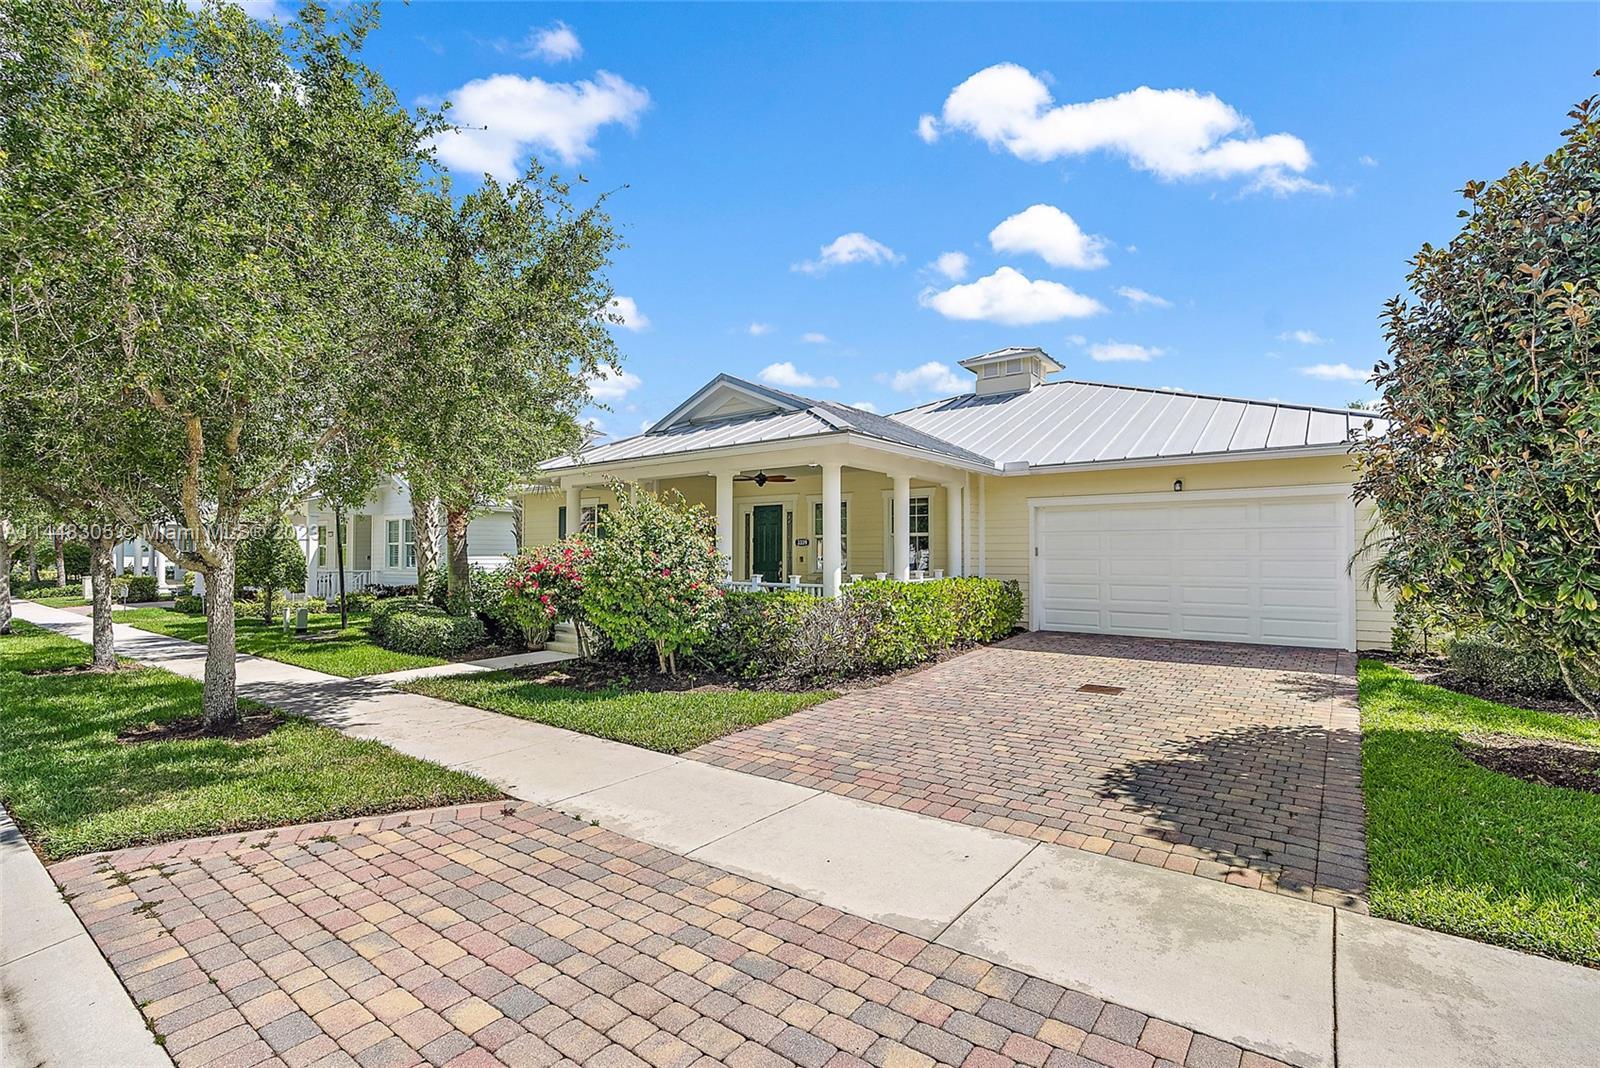 Welcome home to Mallory Creek, one of Jupiter's most highly sought after communities! This sophistic